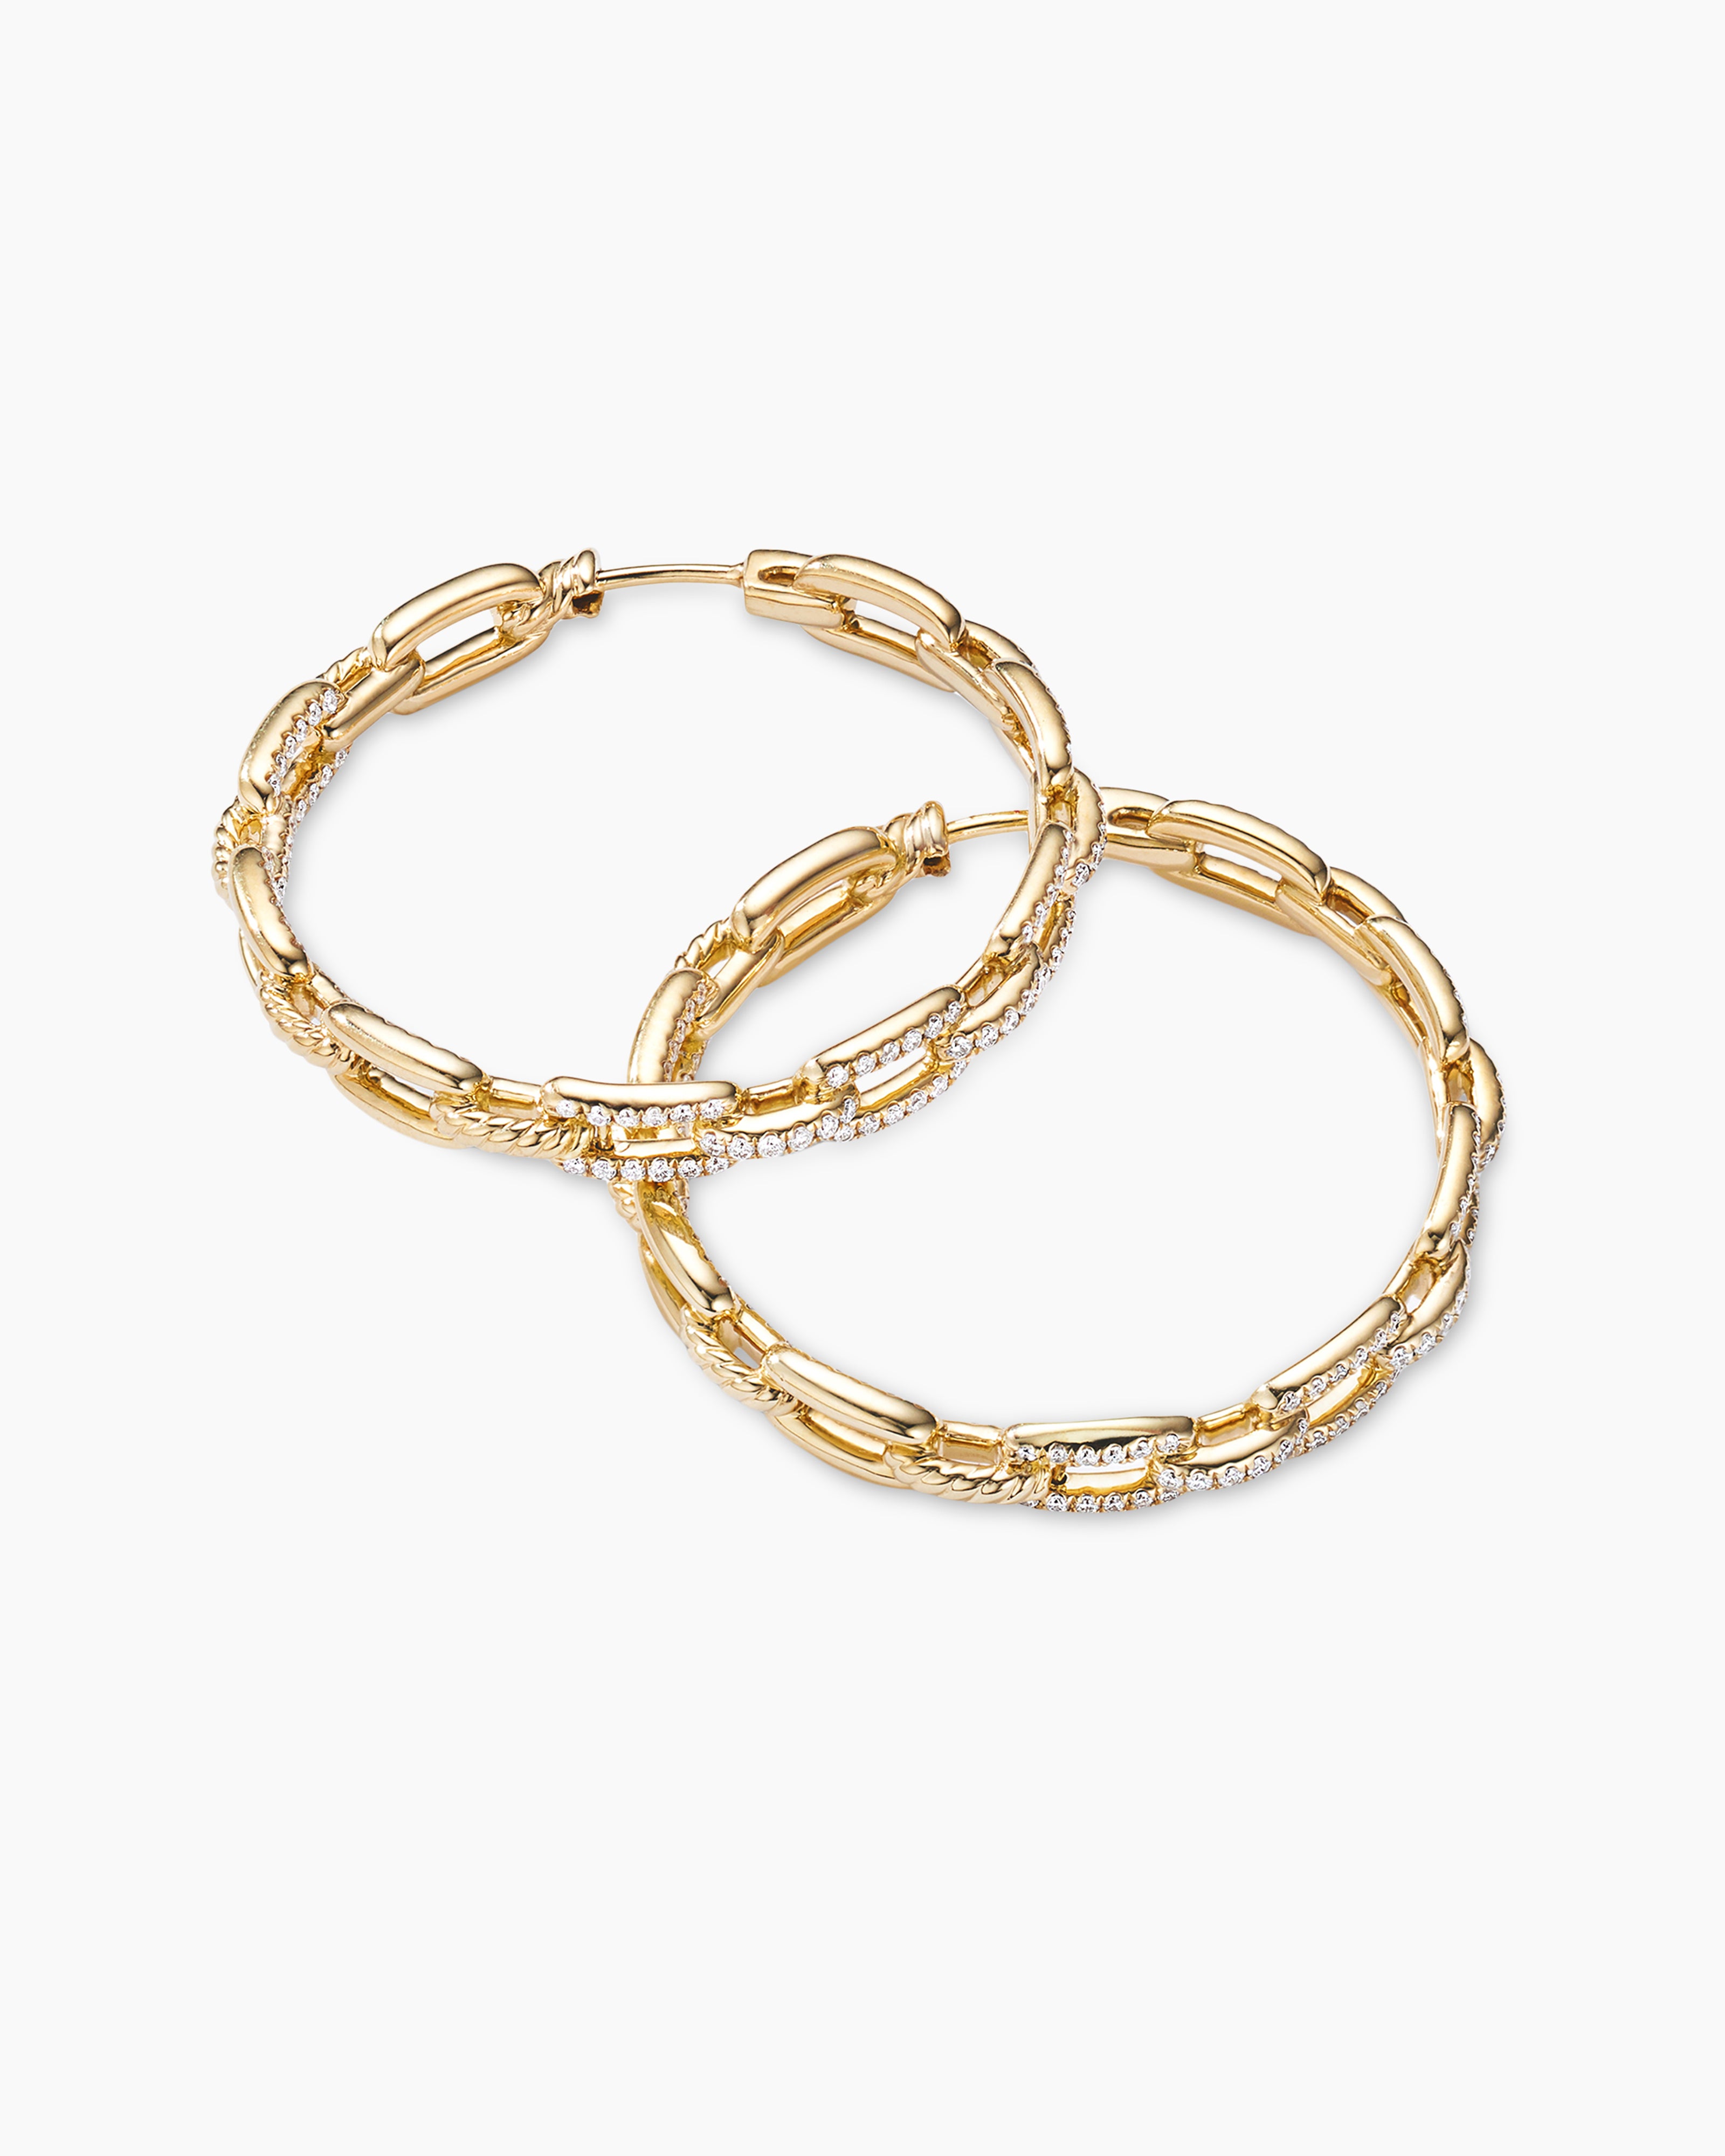 Stax Chain Link Hoop Earrings in 18K Yellow Gold with Pavé Diamonds